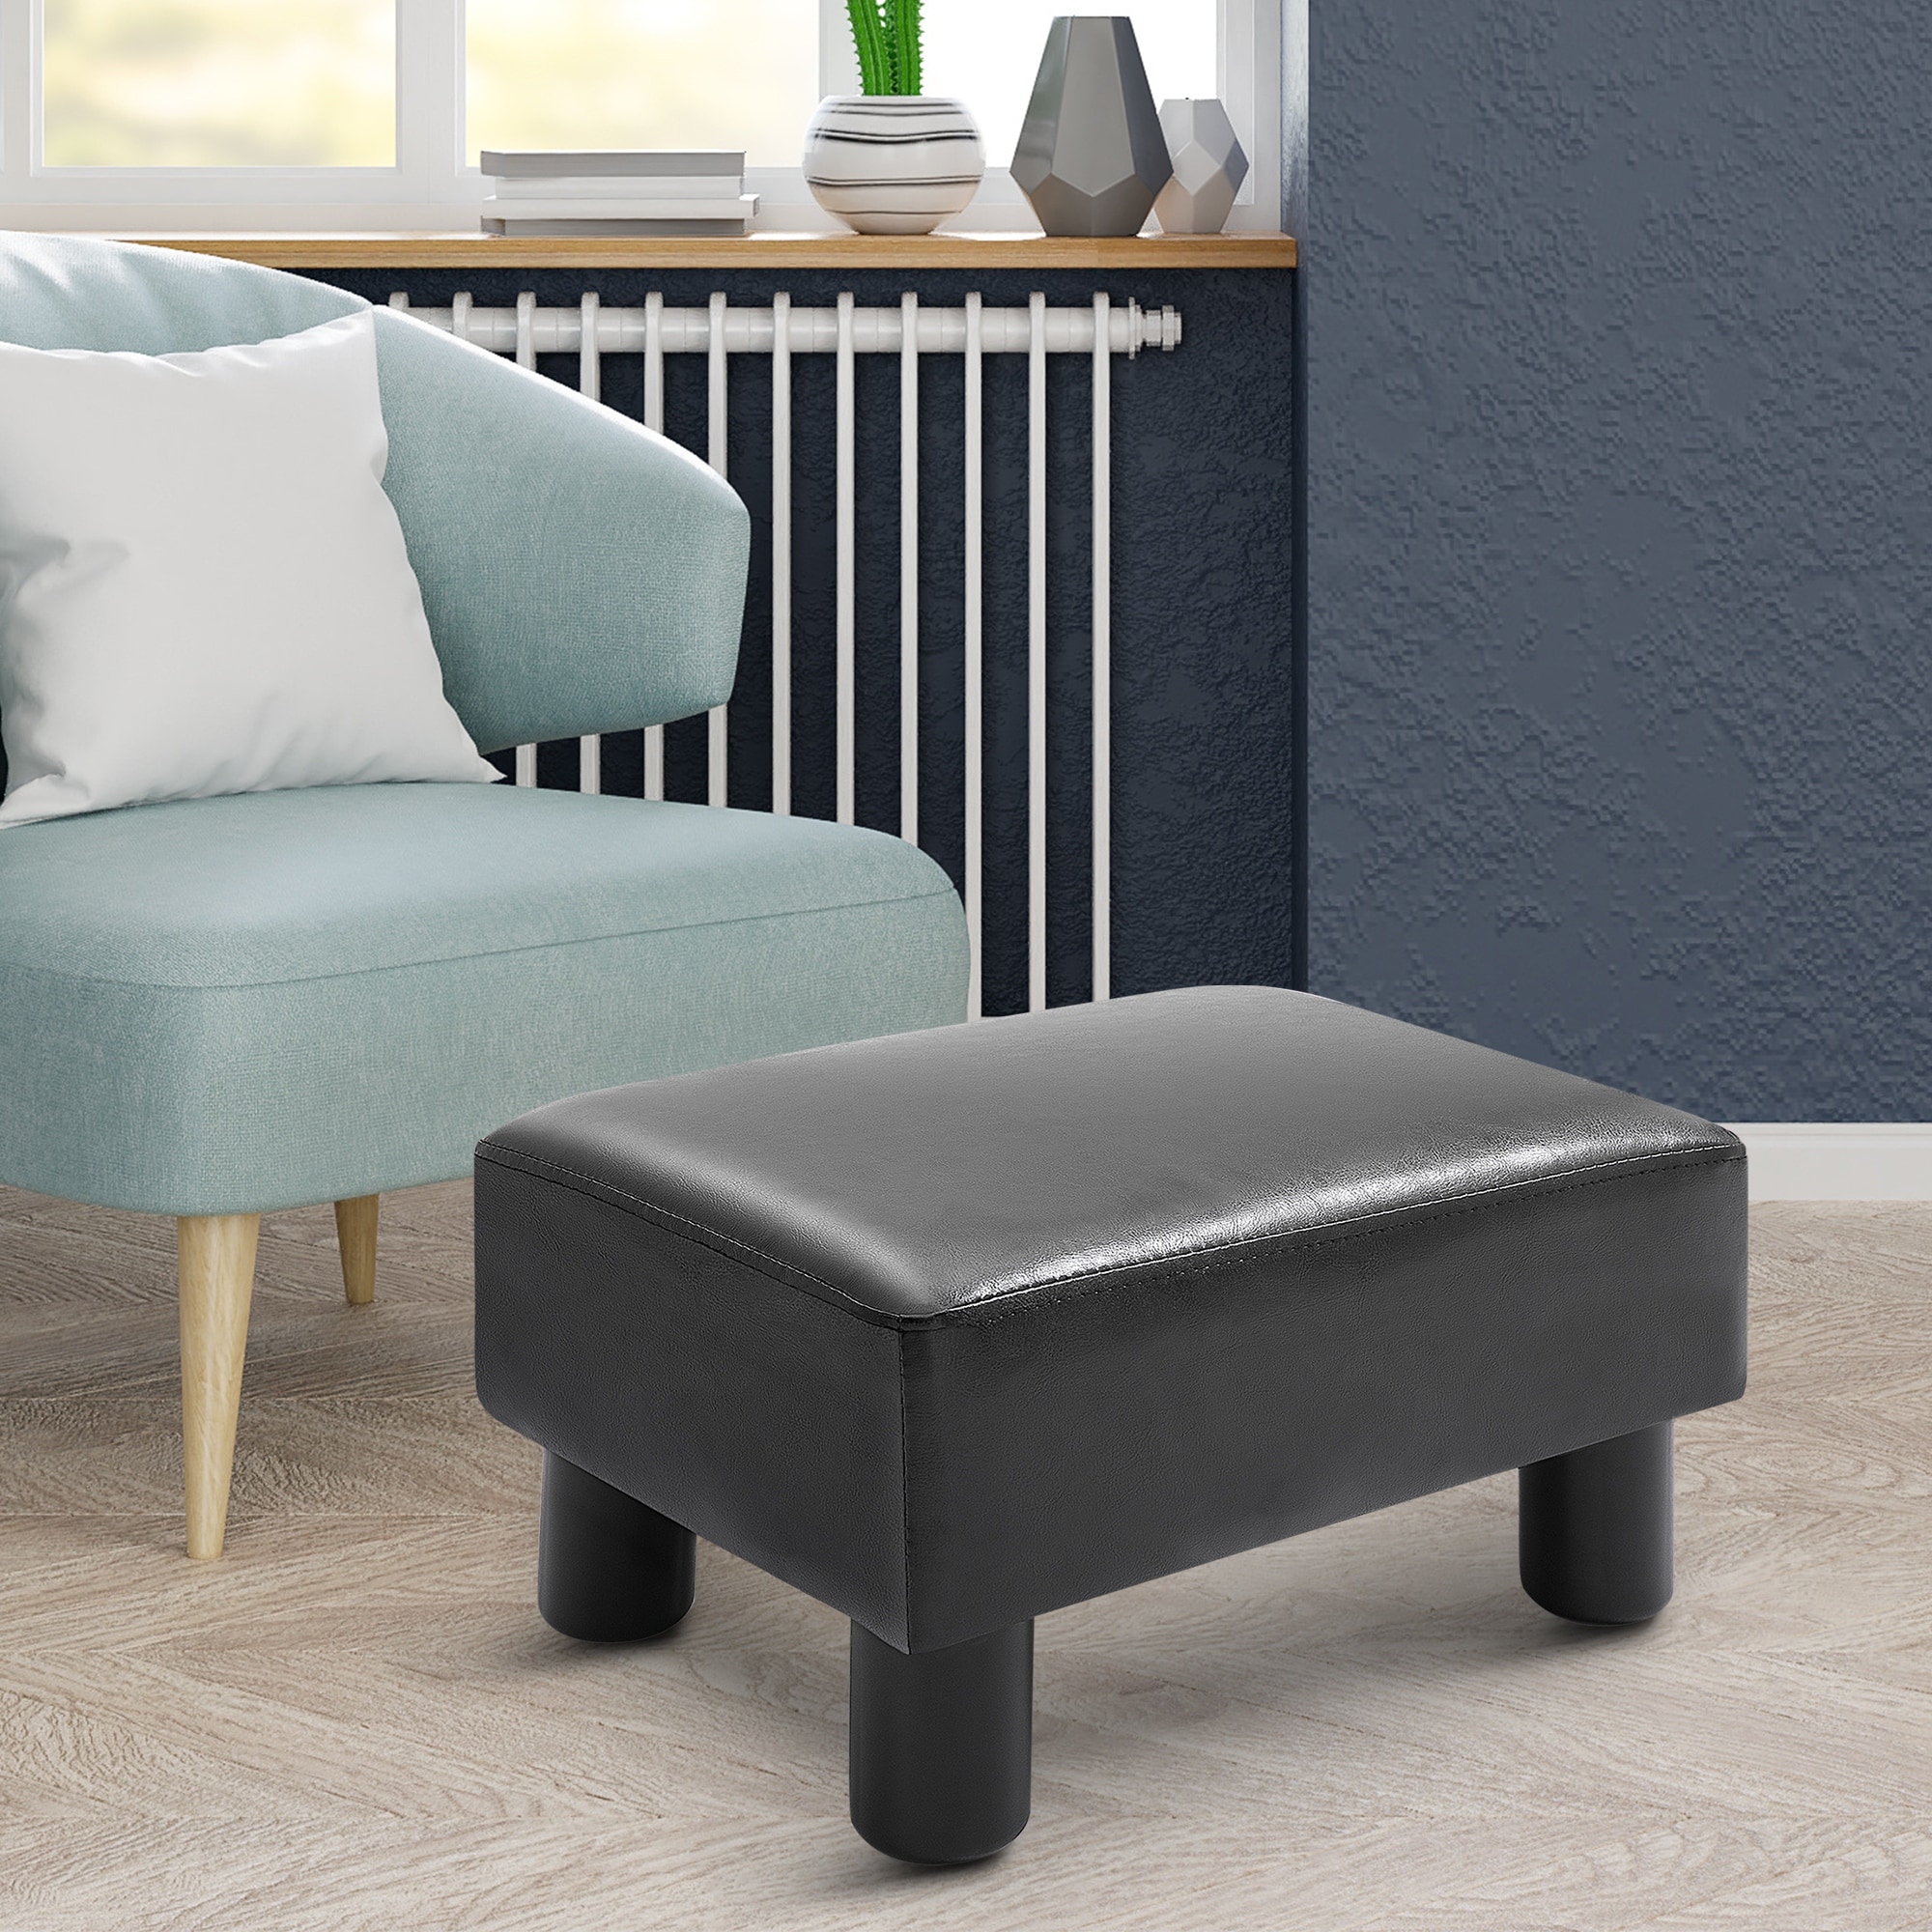 https://ak1.ostkcdn.com/images/products/is/images/direct/a2deb5e0b4290695484c818e0ba5be0e5d4c94ec/HOMCOM-Modern-Faux-Leather-Upholstered-Rectangular-Ottoman-Footrest-with-Padded-Foam-Seat-and-Plastic-Legs.jpg